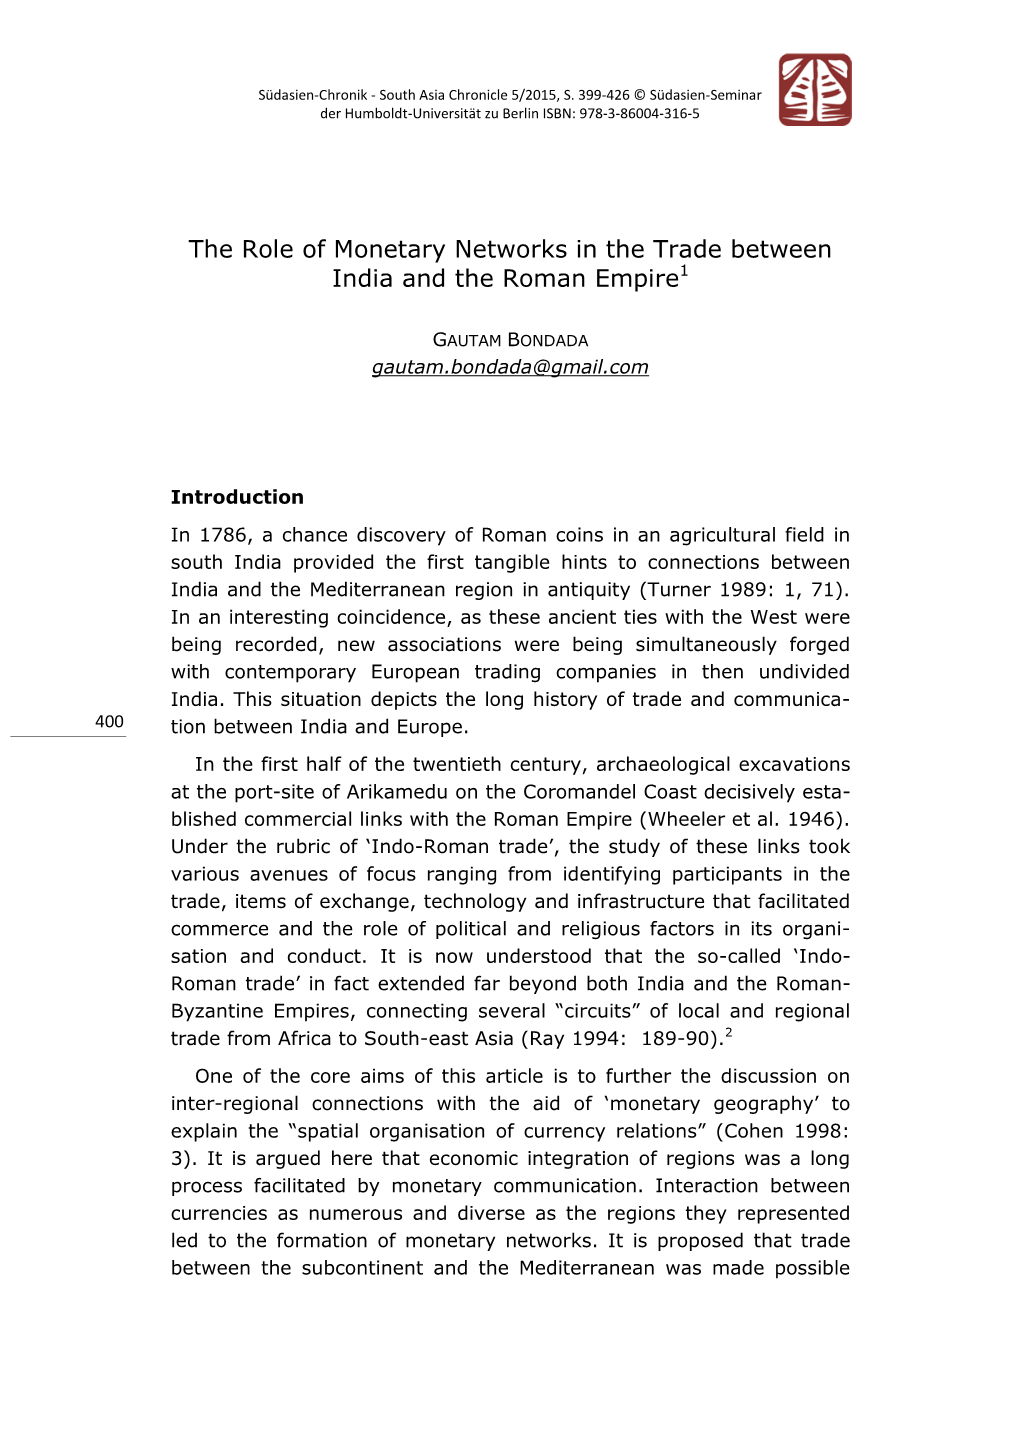 The Role of Monetary Networks in the Trade Between India and the Roman Empire1